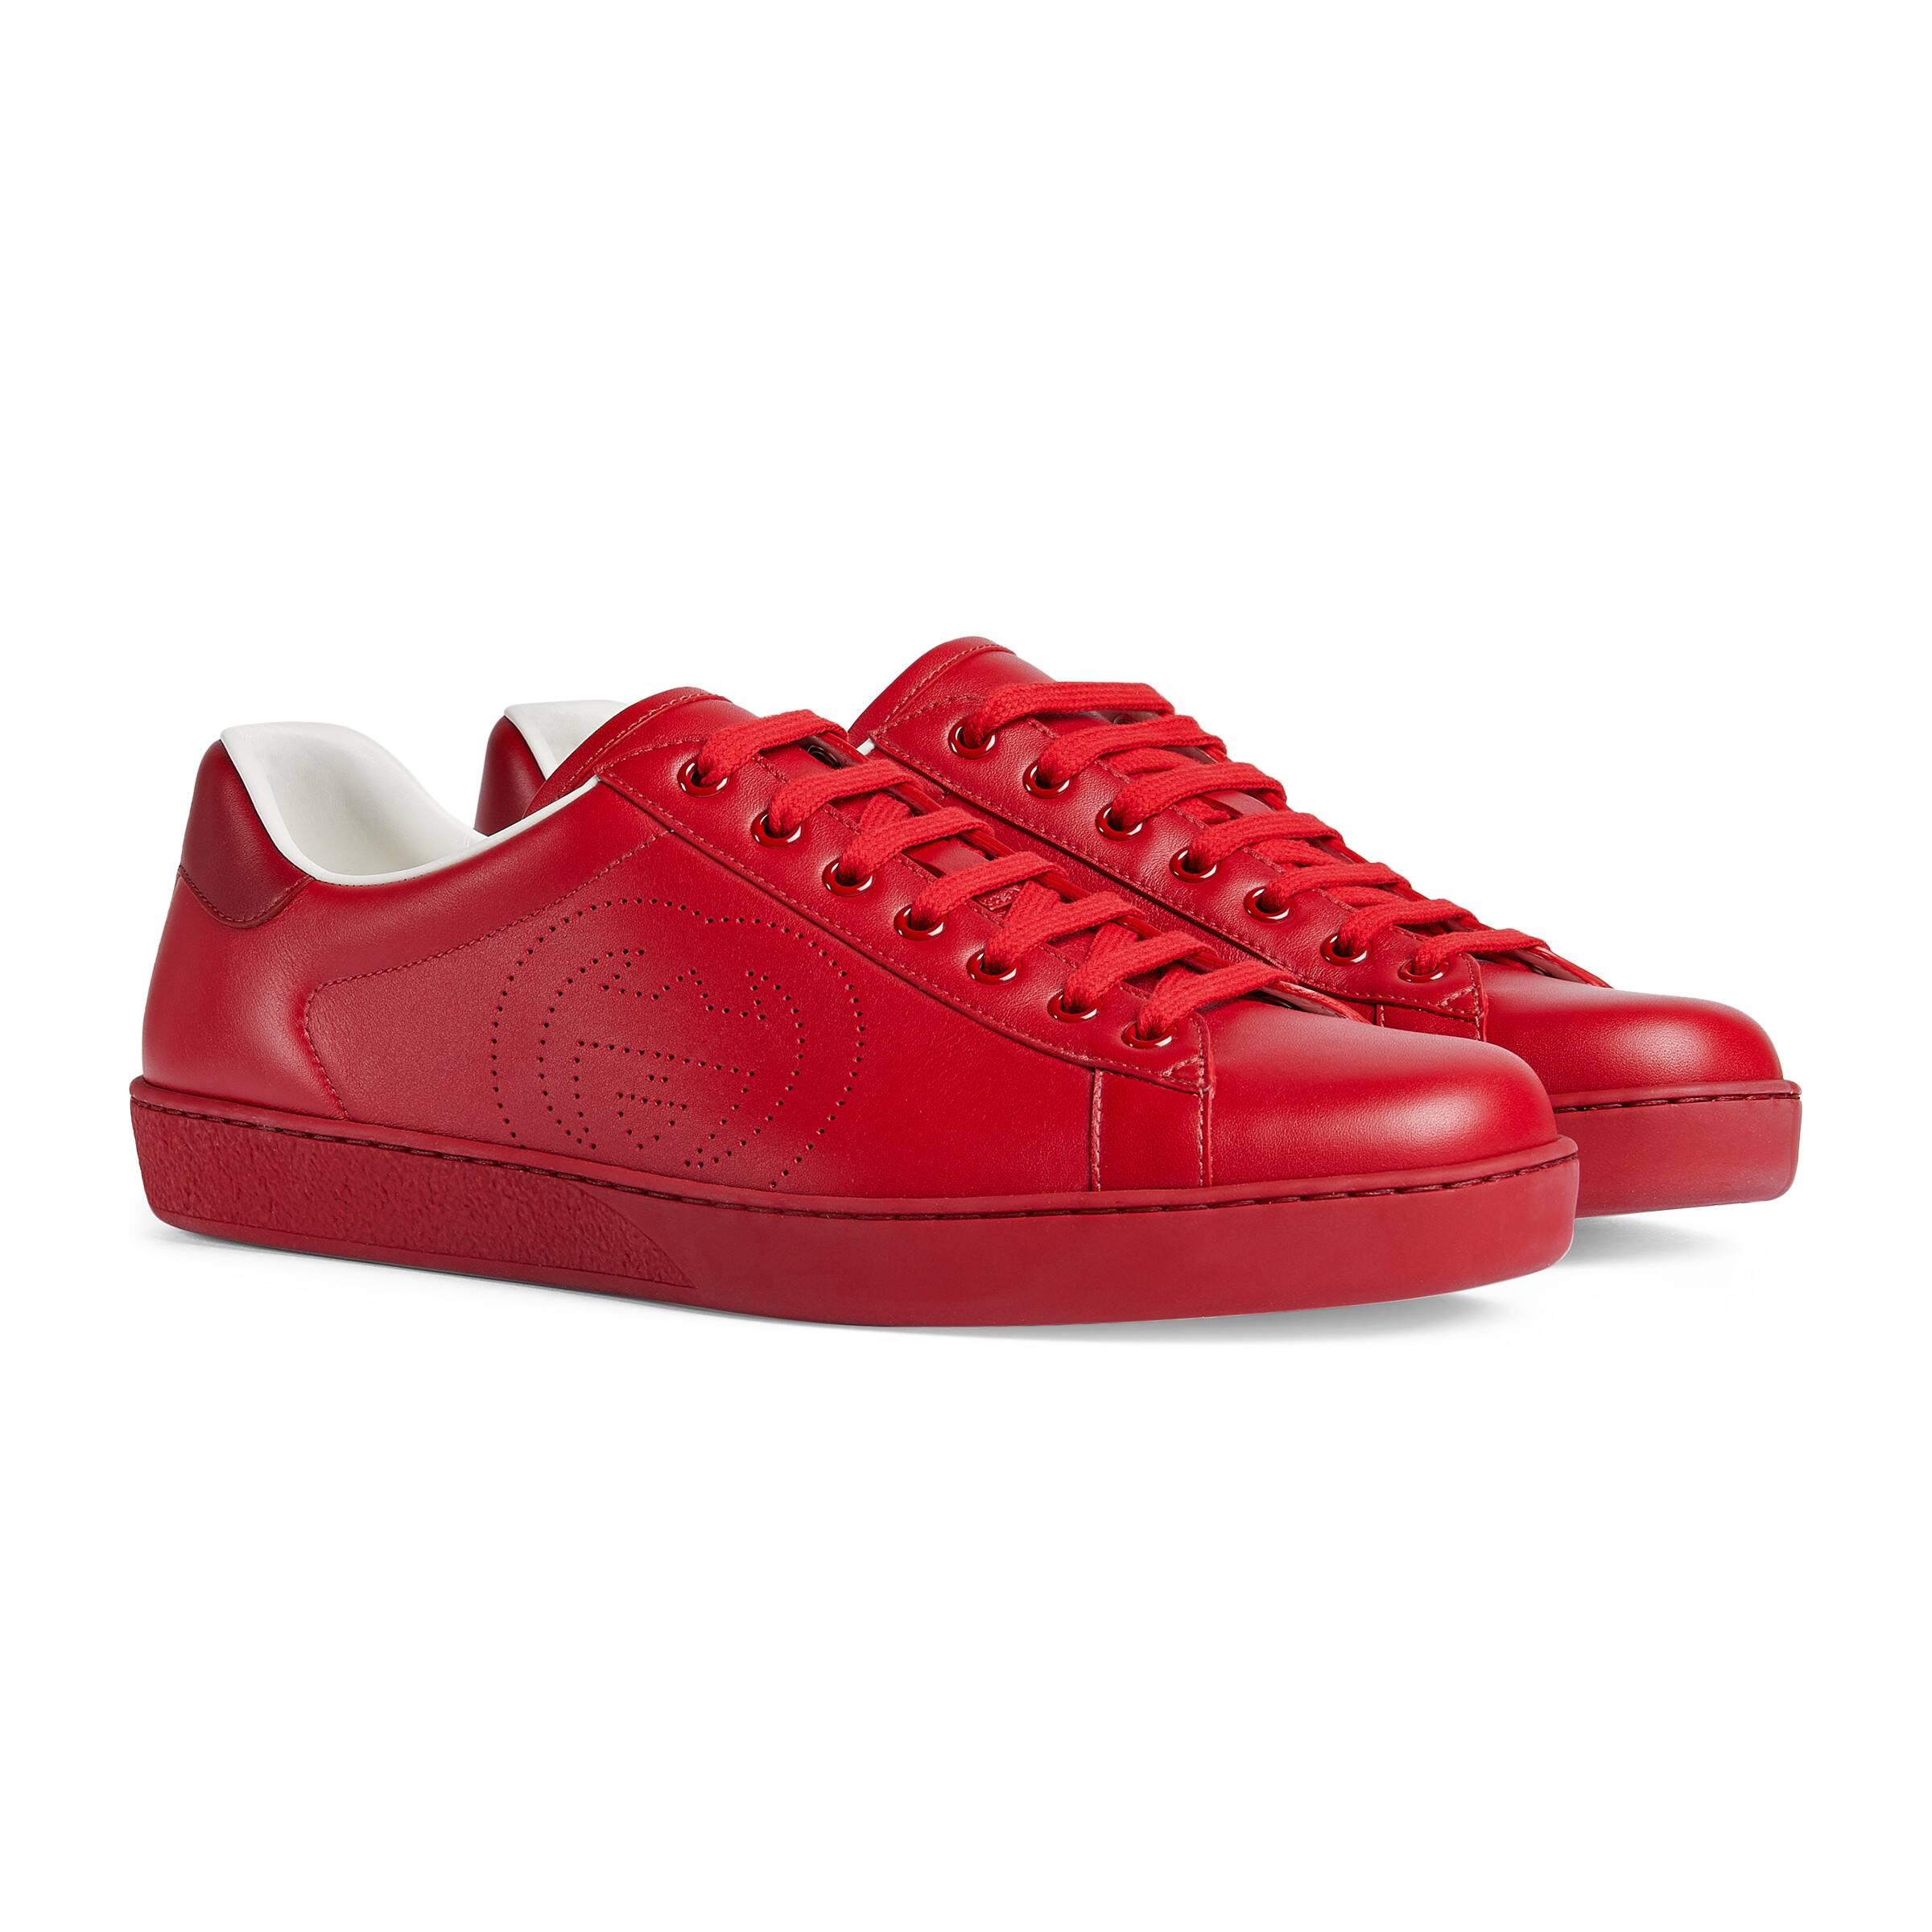 Gucci Leather Ace Sneaker With Interlocking G in Red for Men - Lyst